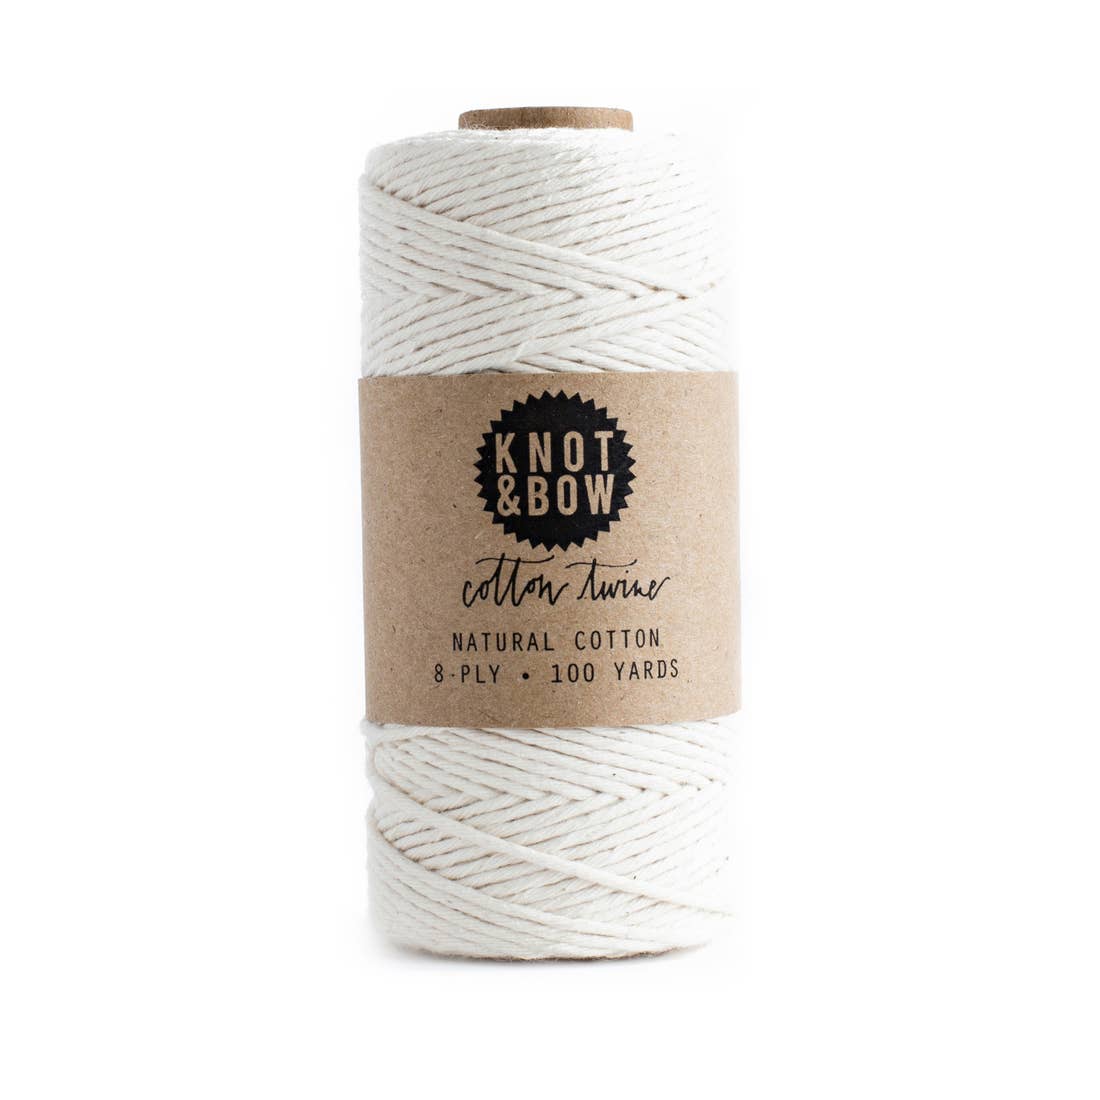 Cotton Twine by Knot & Bow - Natural Cotton by Knot & Bow - K. A. Artist Shop